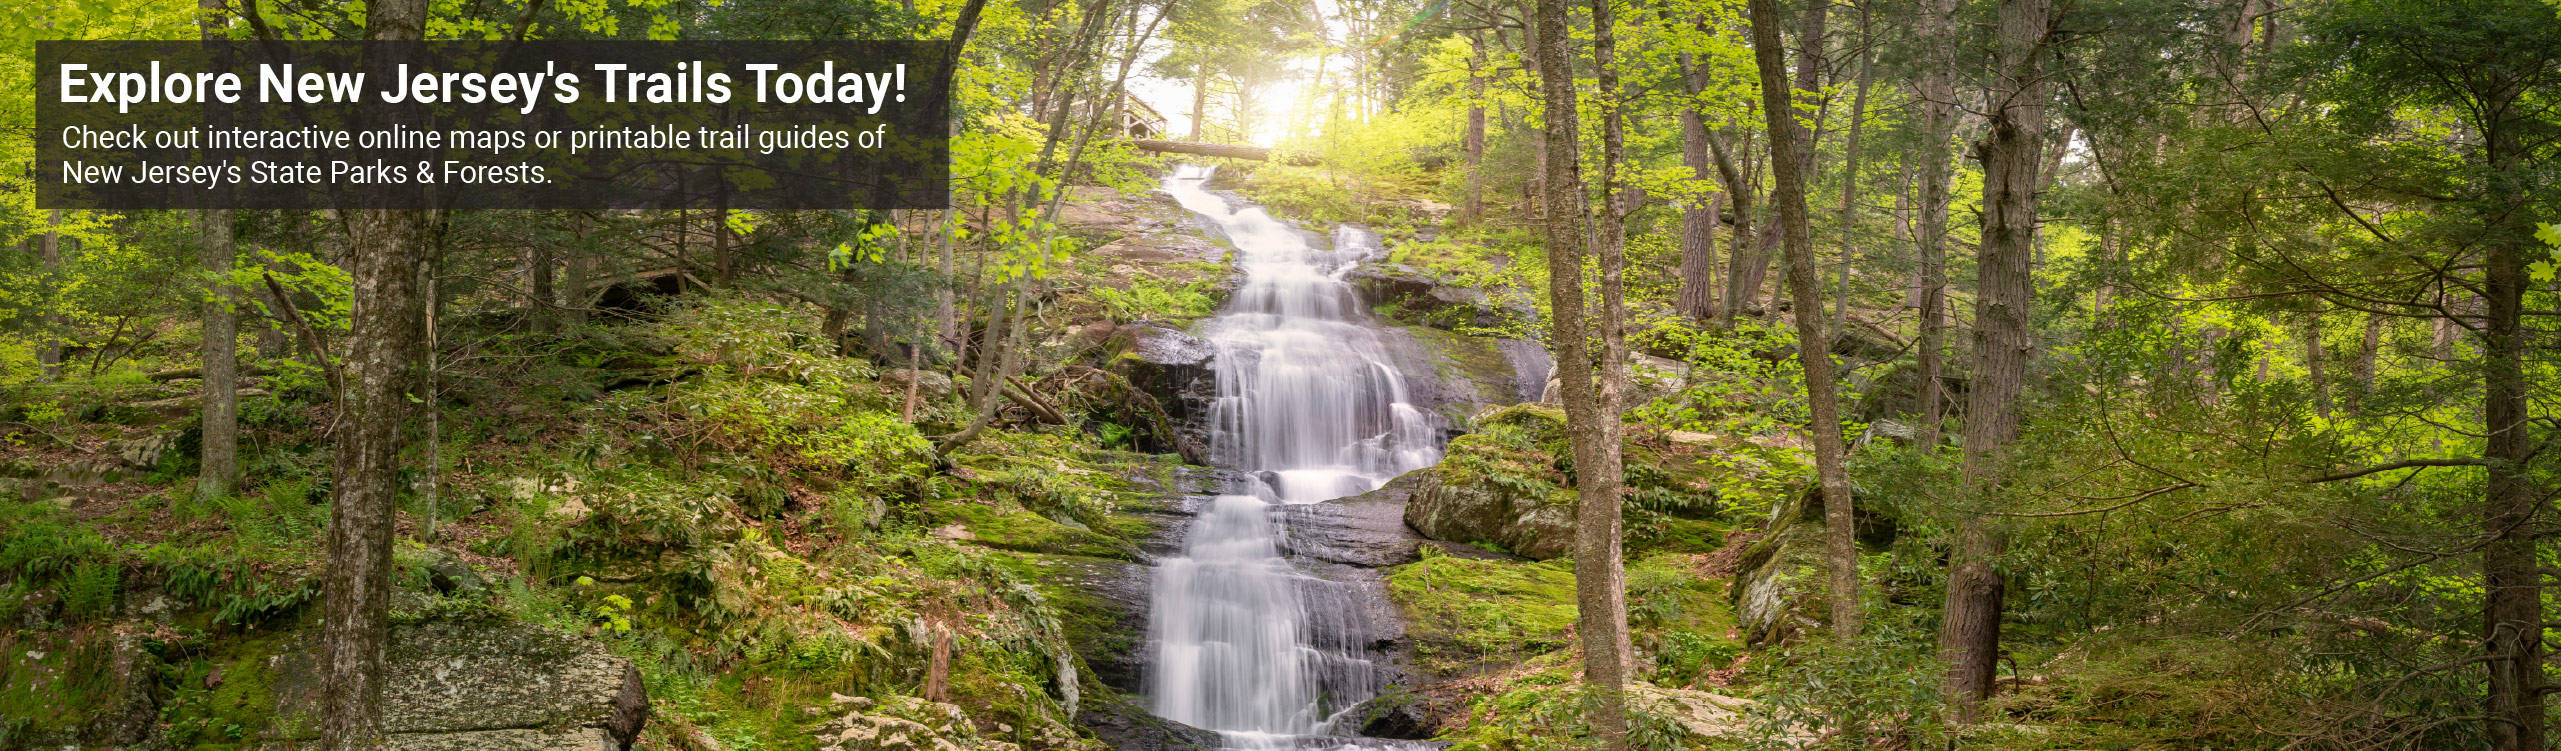 photo of waterfall in the woods